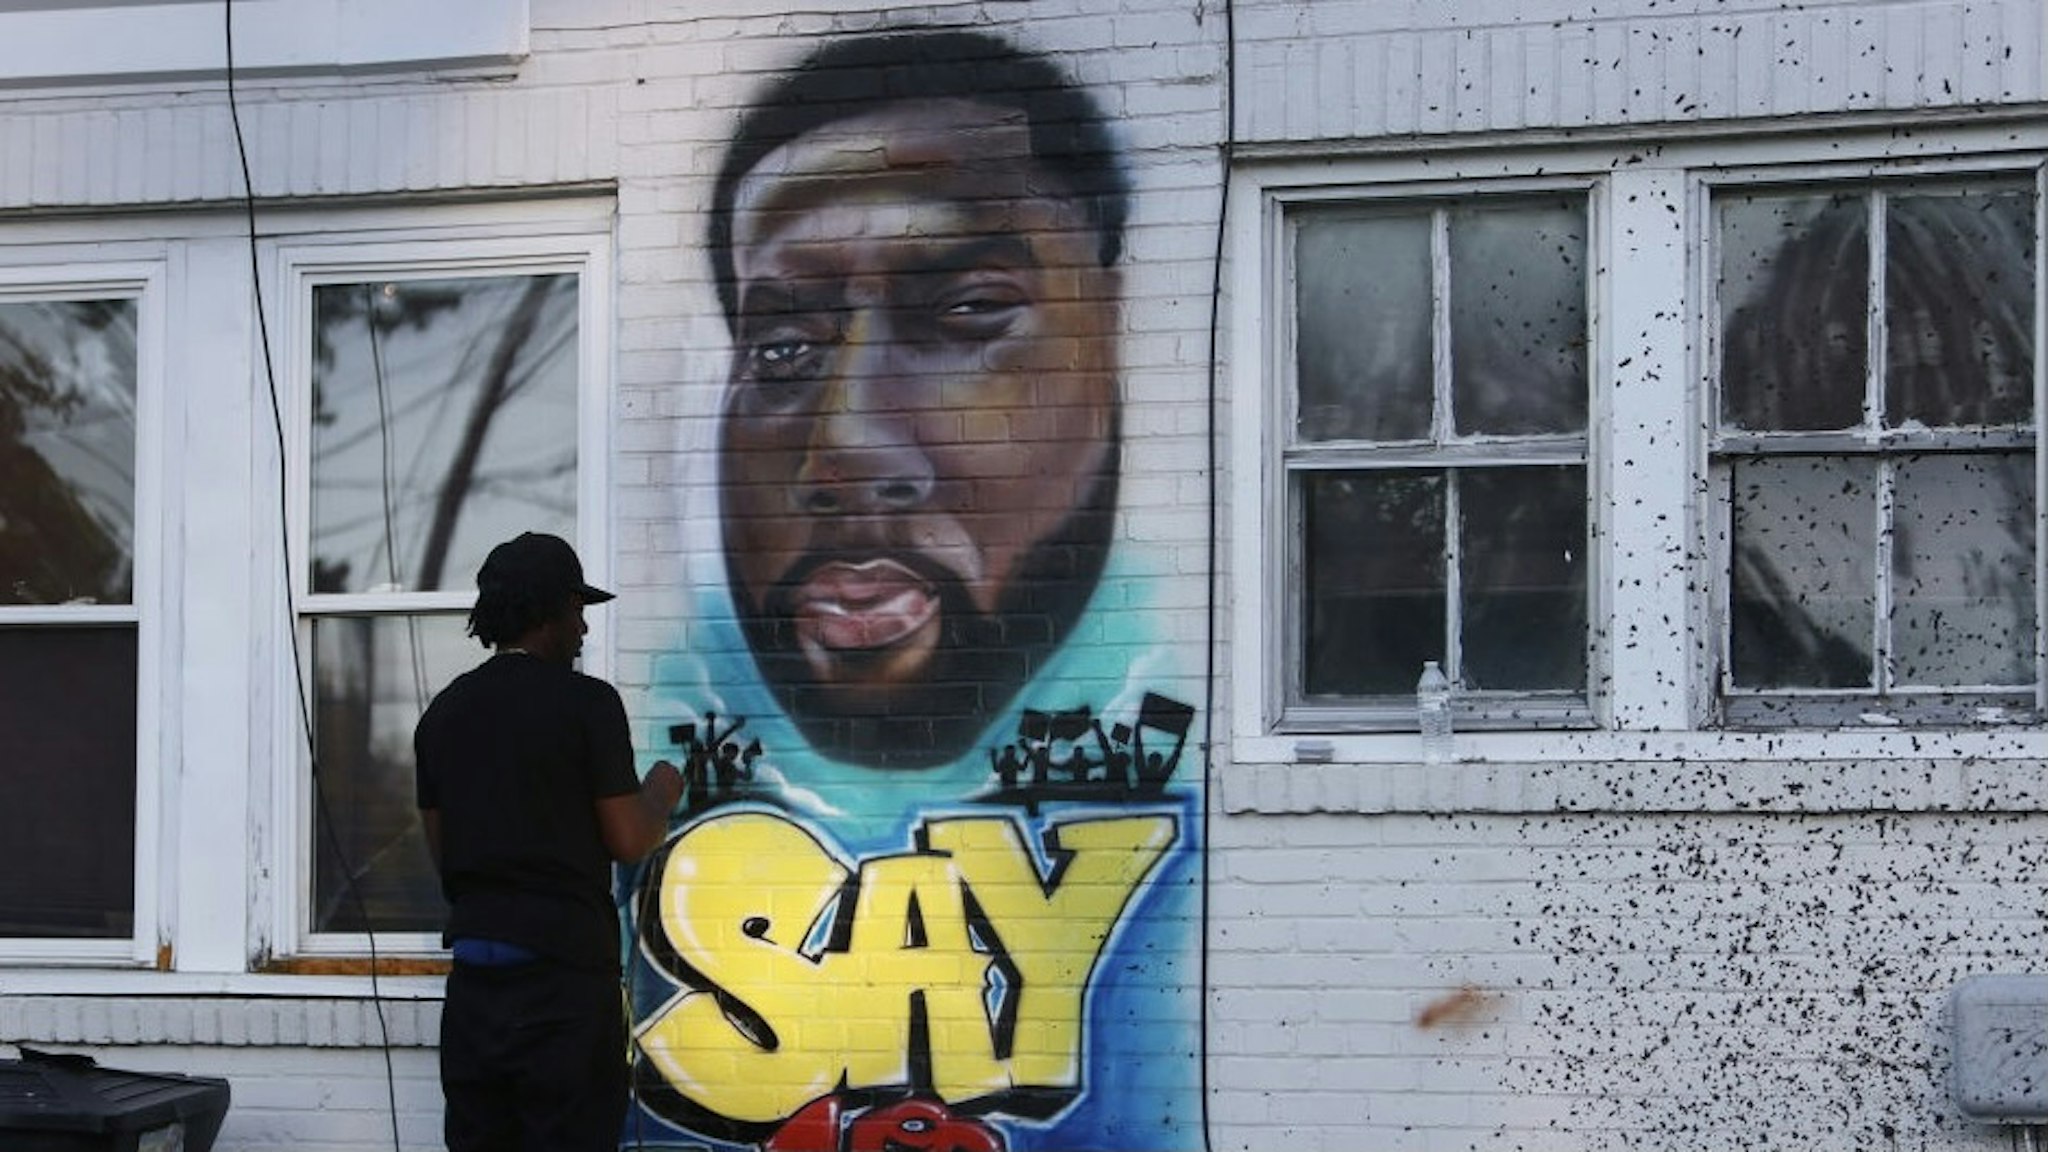 ELIZABETH CITY, NORTH CAROLINA - MAY 01: Ulysses Edwards paints a portrait of Andrew Brown Jr. on the side of the house in the area where he was killed on May 01, 2021 in Elizabeth City, North Carolina. Mr. Brown was shot to death by Pasquotank County Sheriff's deputies. (Photo by Joe Raedle/Getty Images)